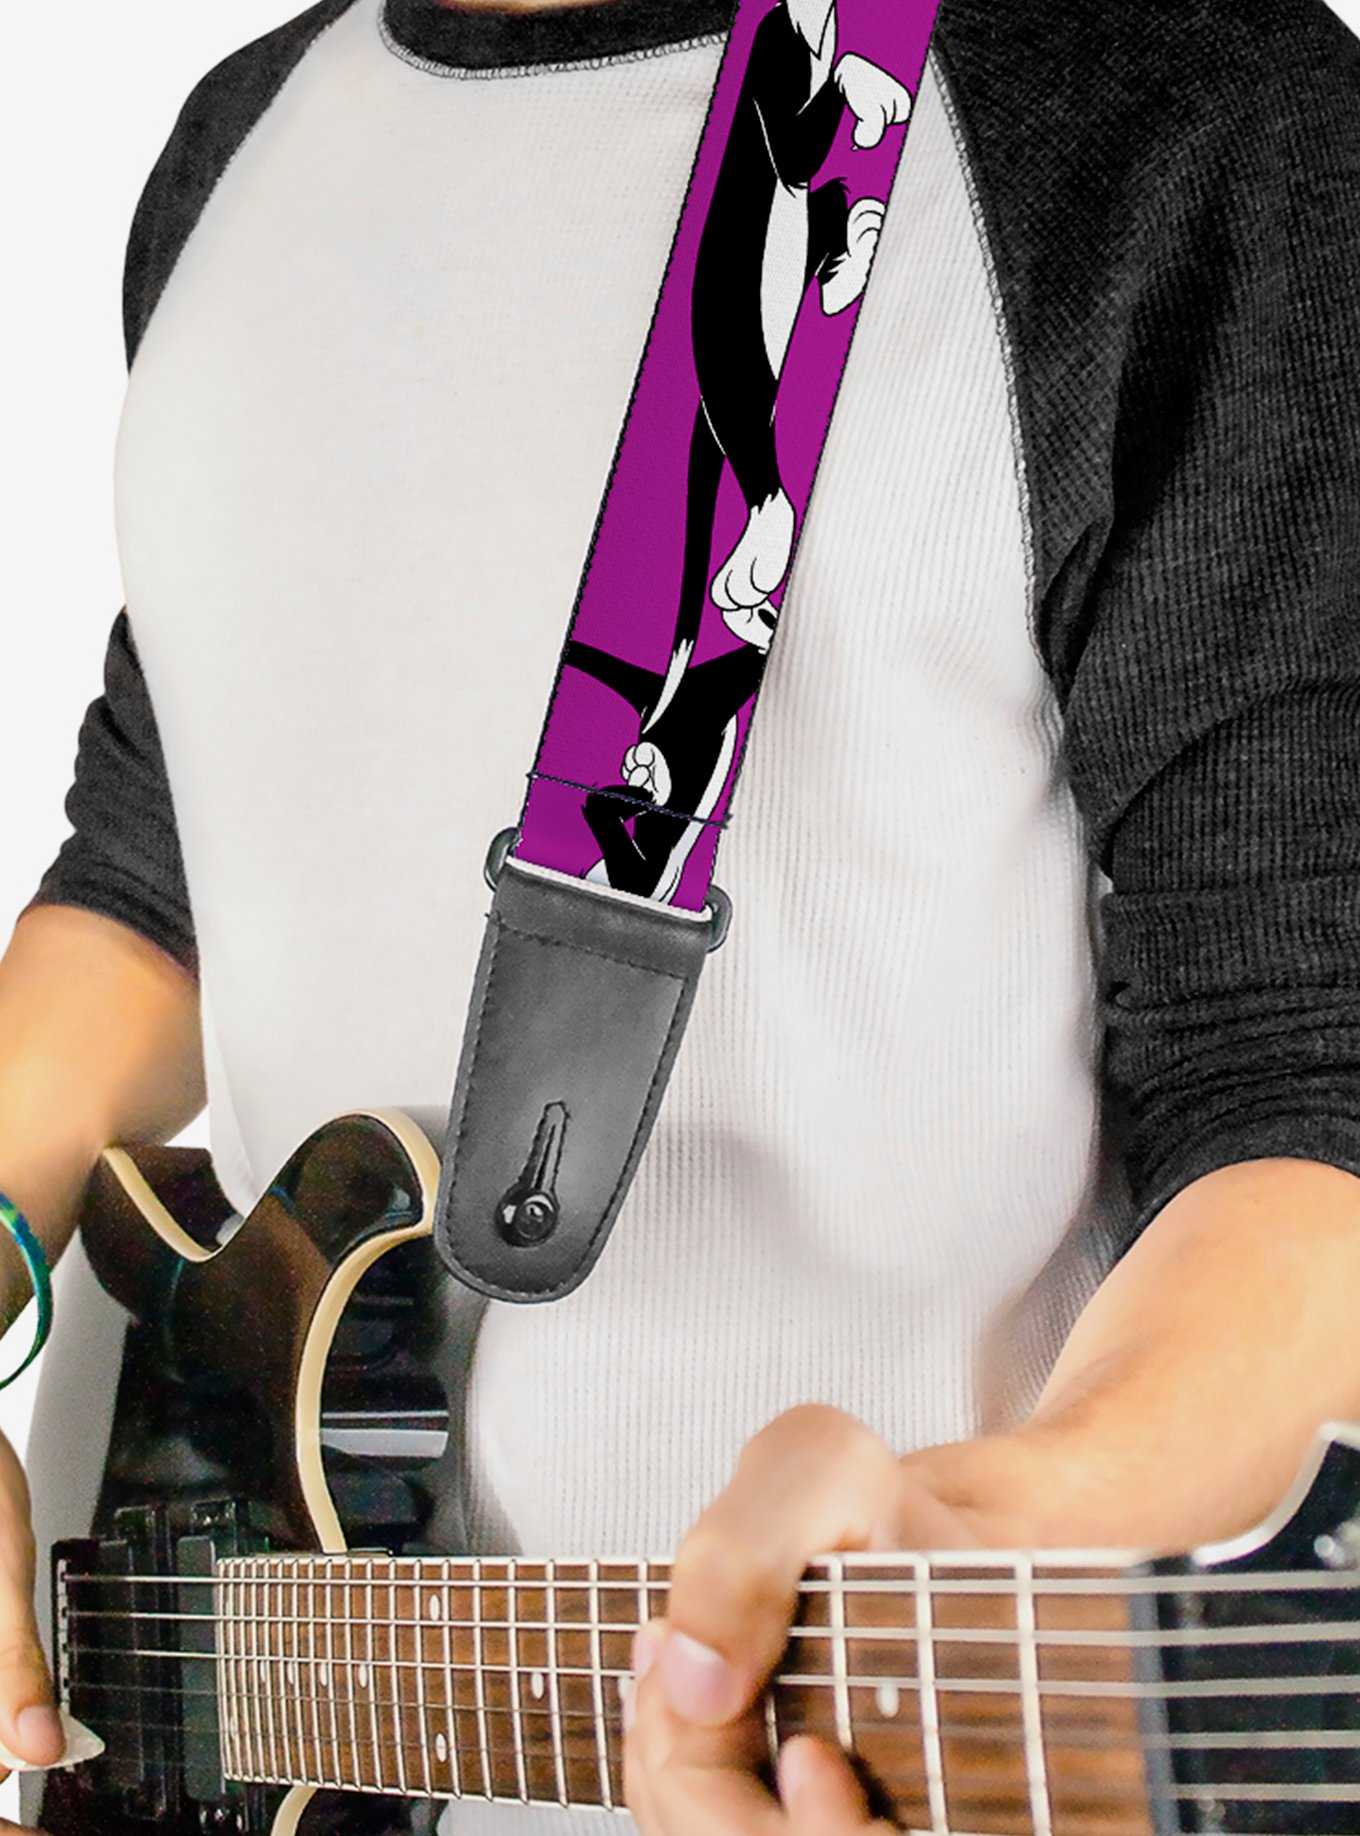 Looney Tunes Sylvester The Cat Poses Guitar Strap, , hi-res